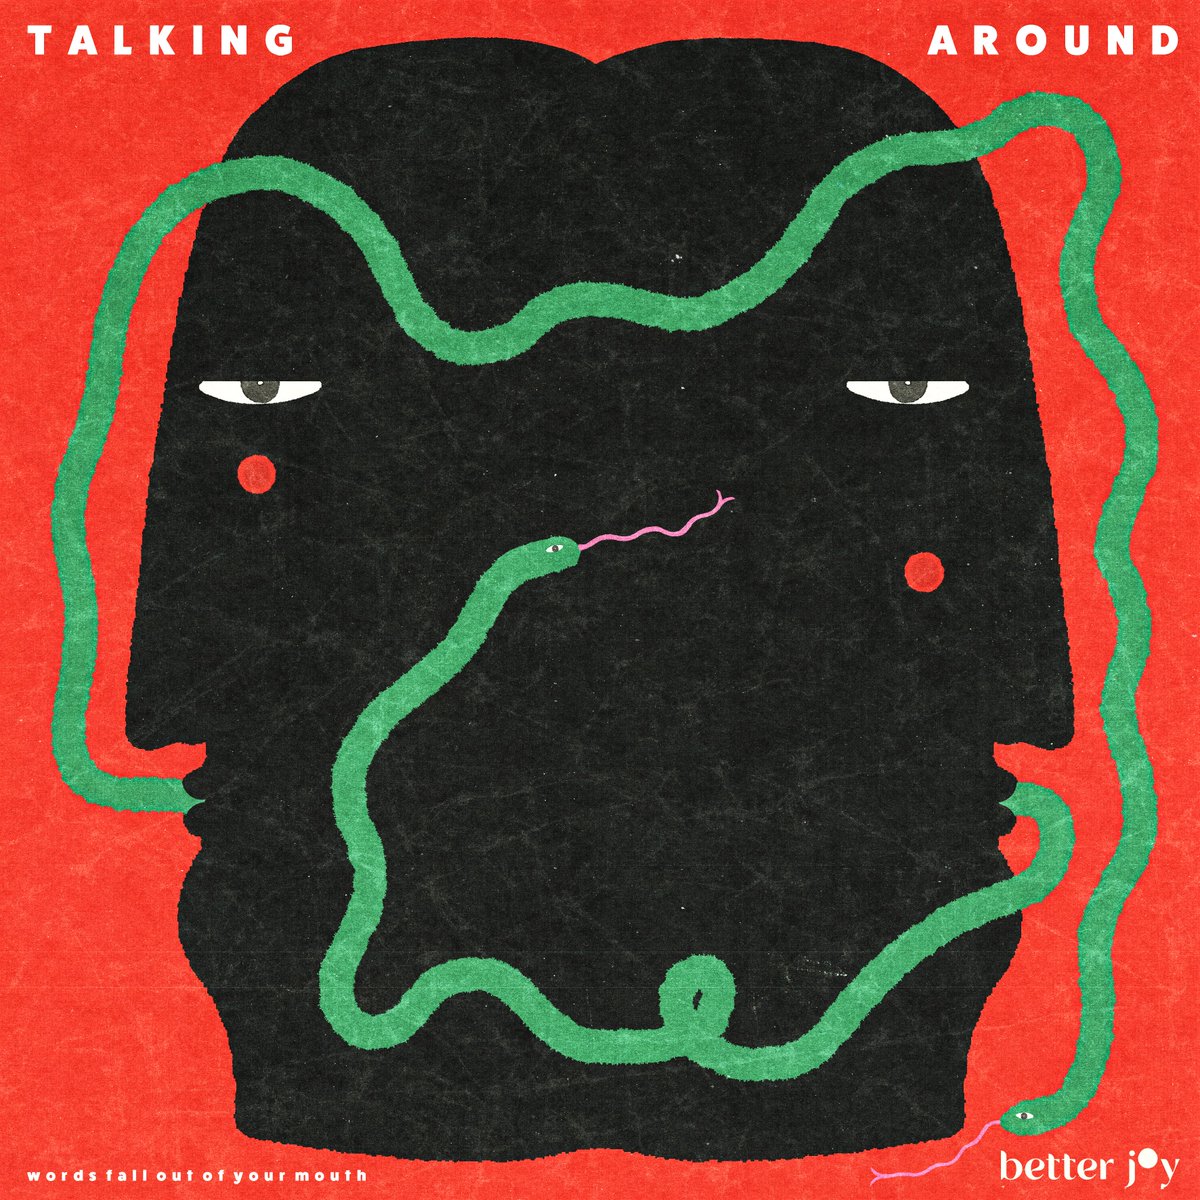 We’re back with another song on the 21st April. This one’s called Talking Around…and you guessed it, it’s about people who talk sh*t about you. Pre-save now: betterjoy.os.fan/talking-around